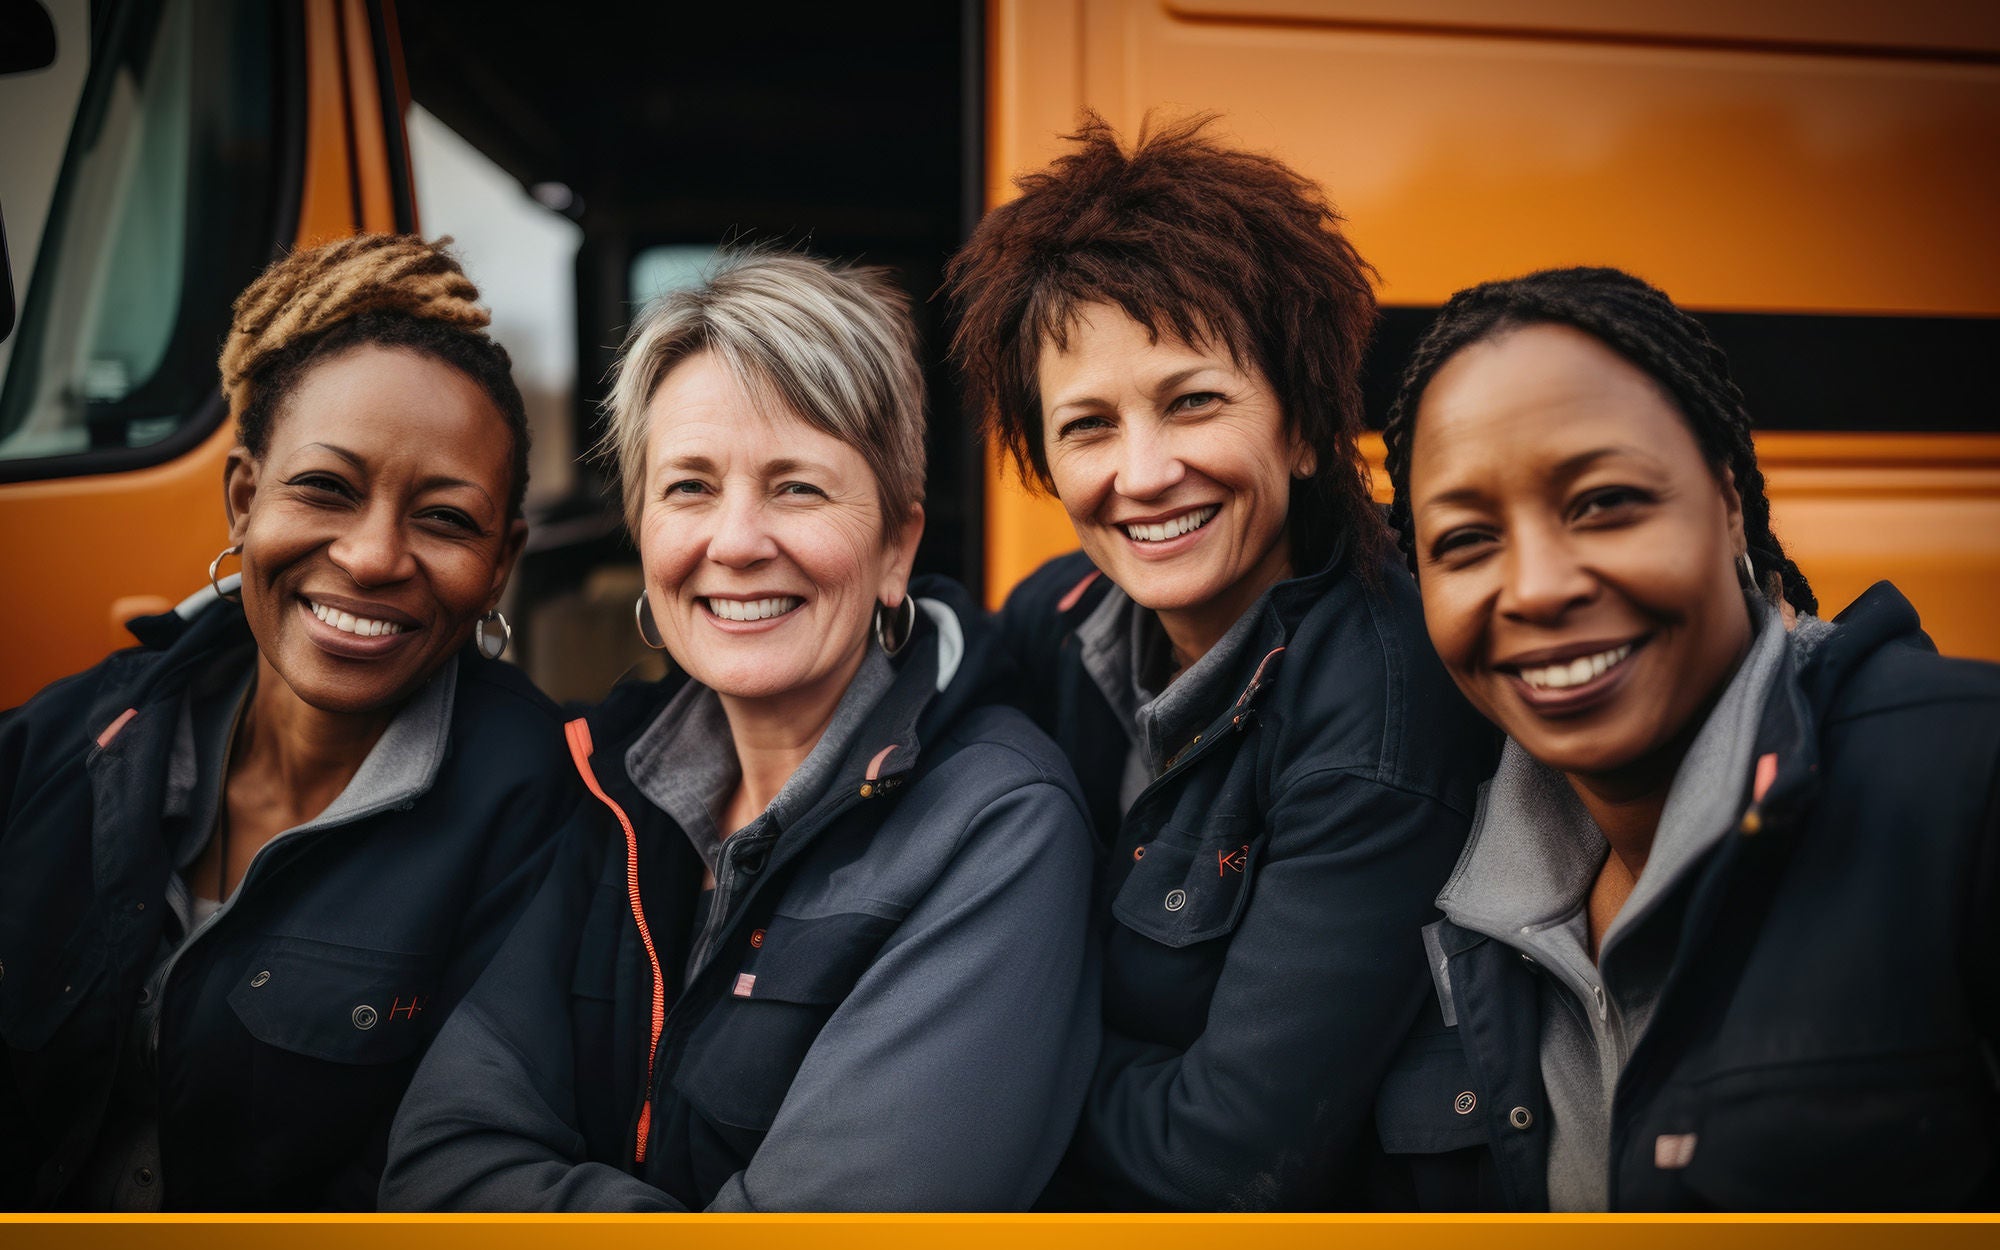 Smiling portrait of a happy group of female truckers working for a trucking company